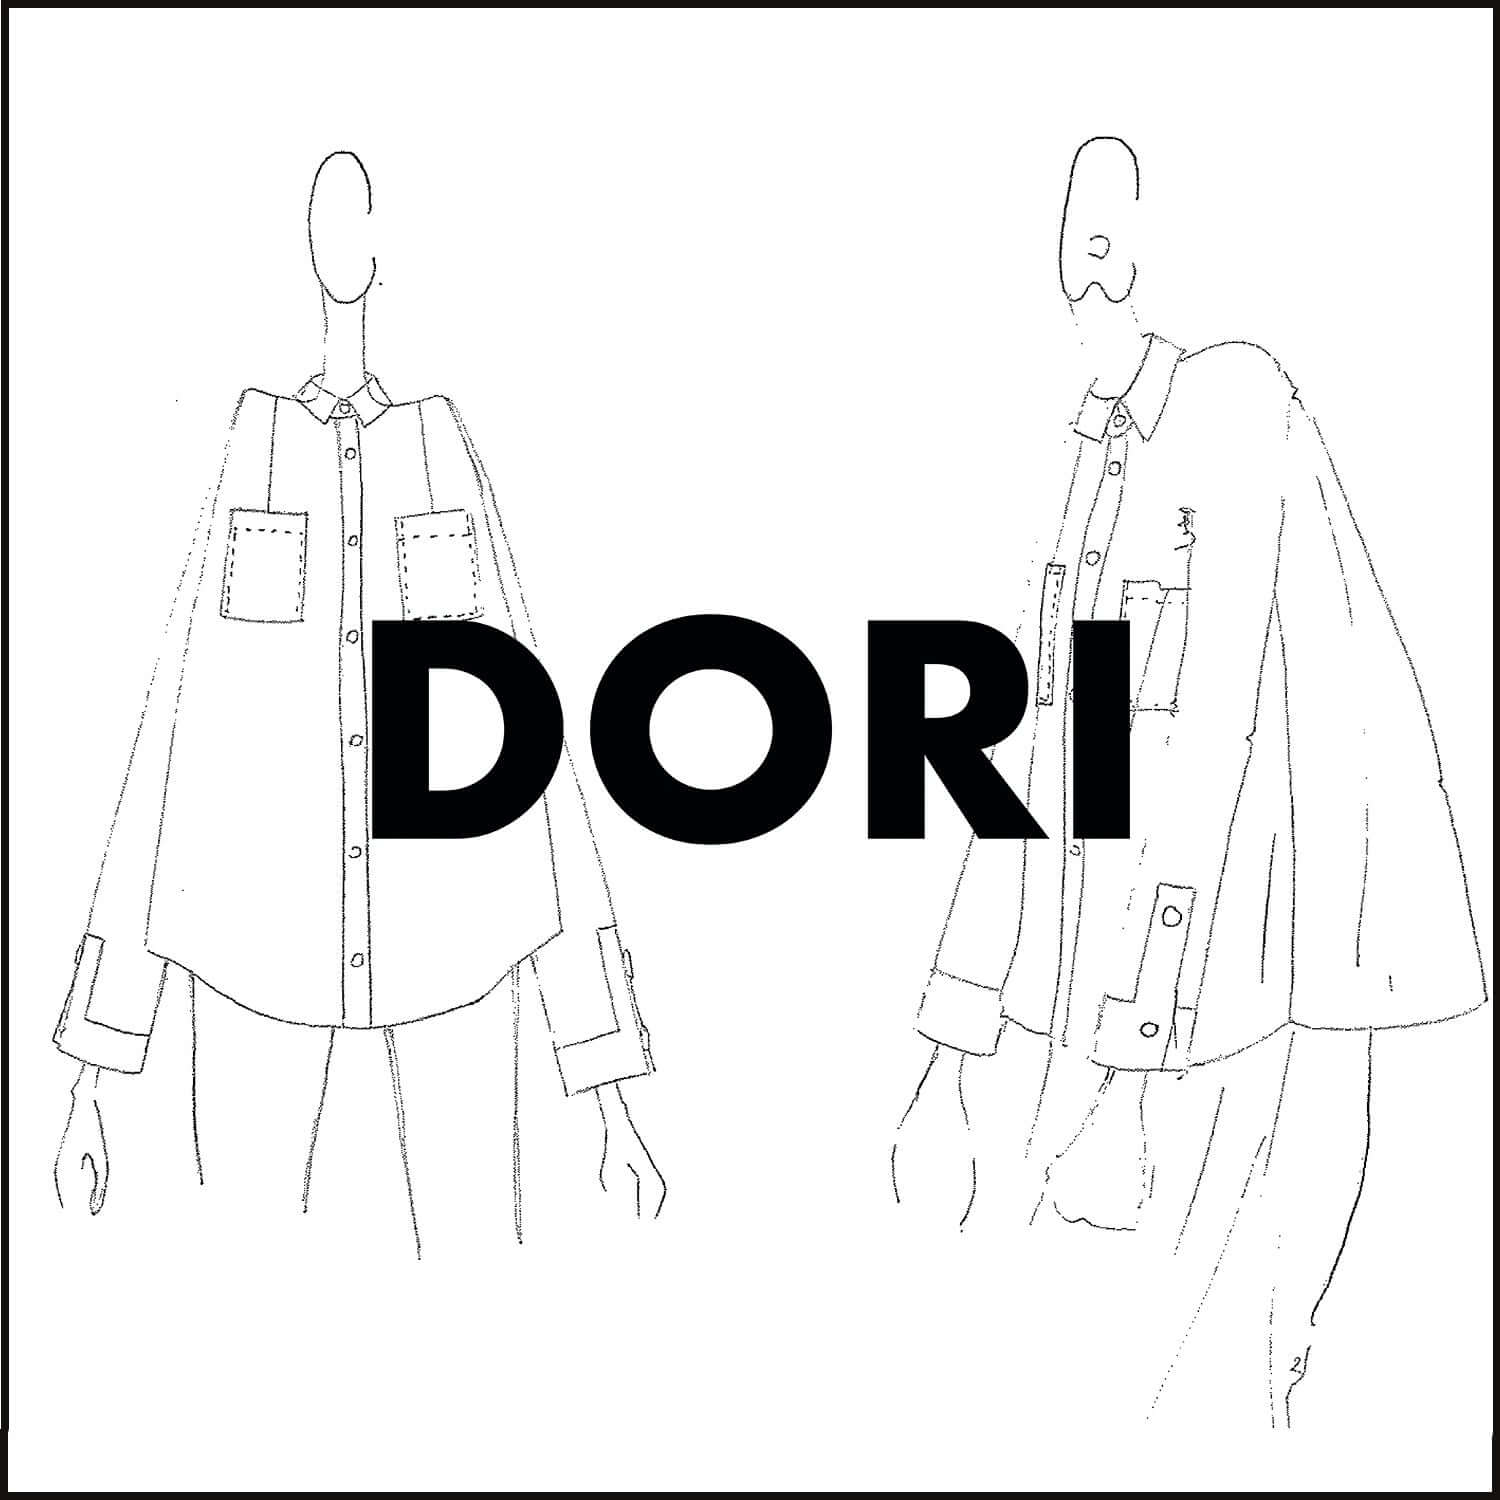 Learn more about... the Dori shirt